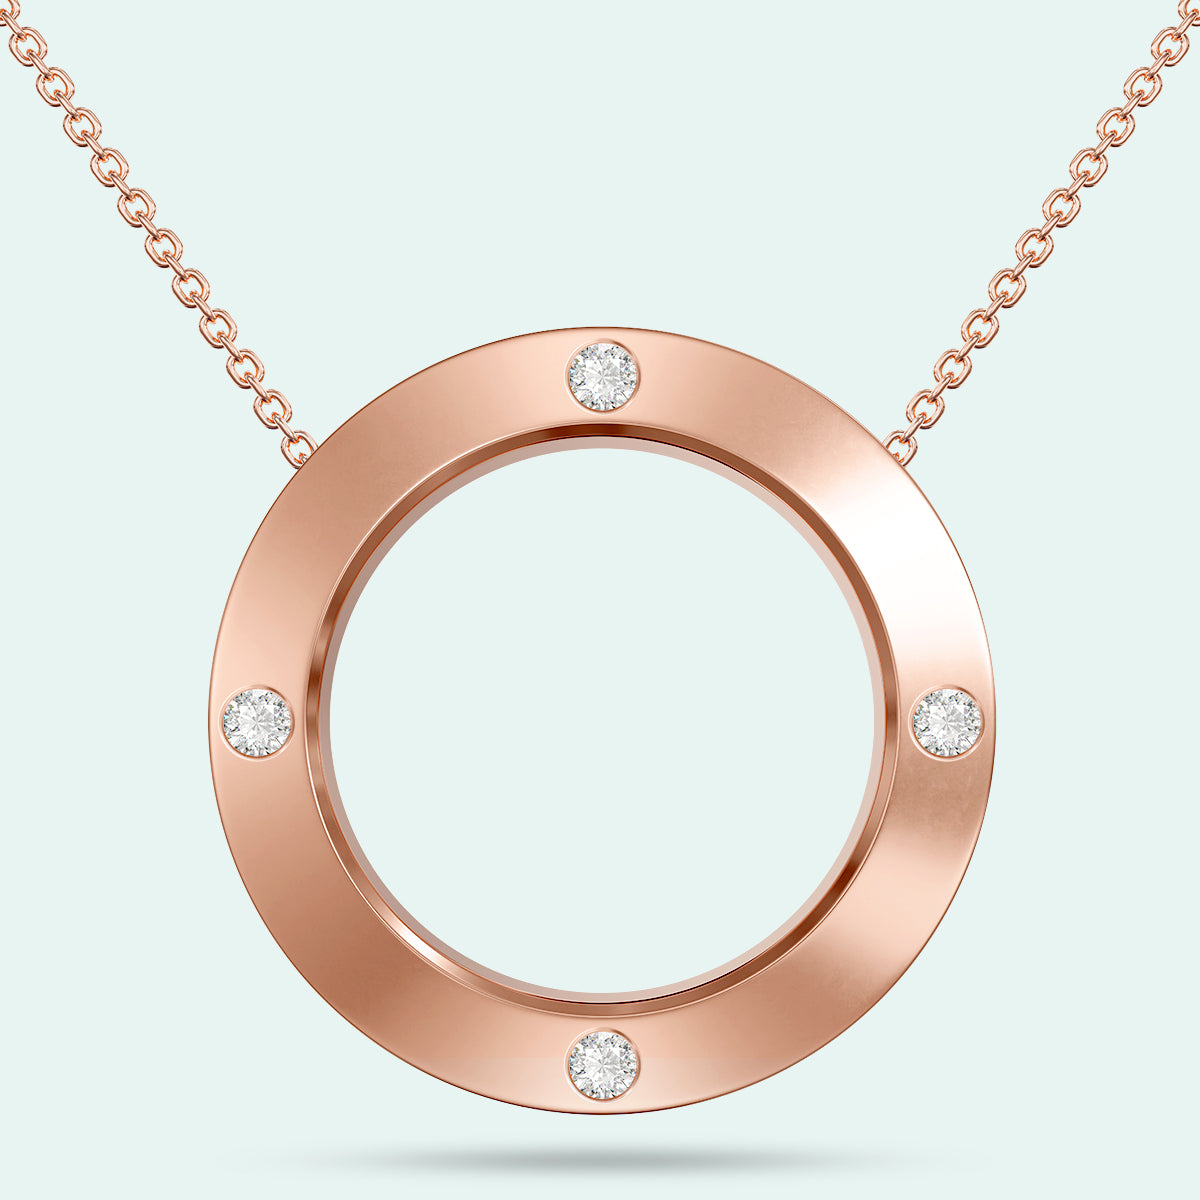 LOVE IN A JEWEL - "The Circle of Love"